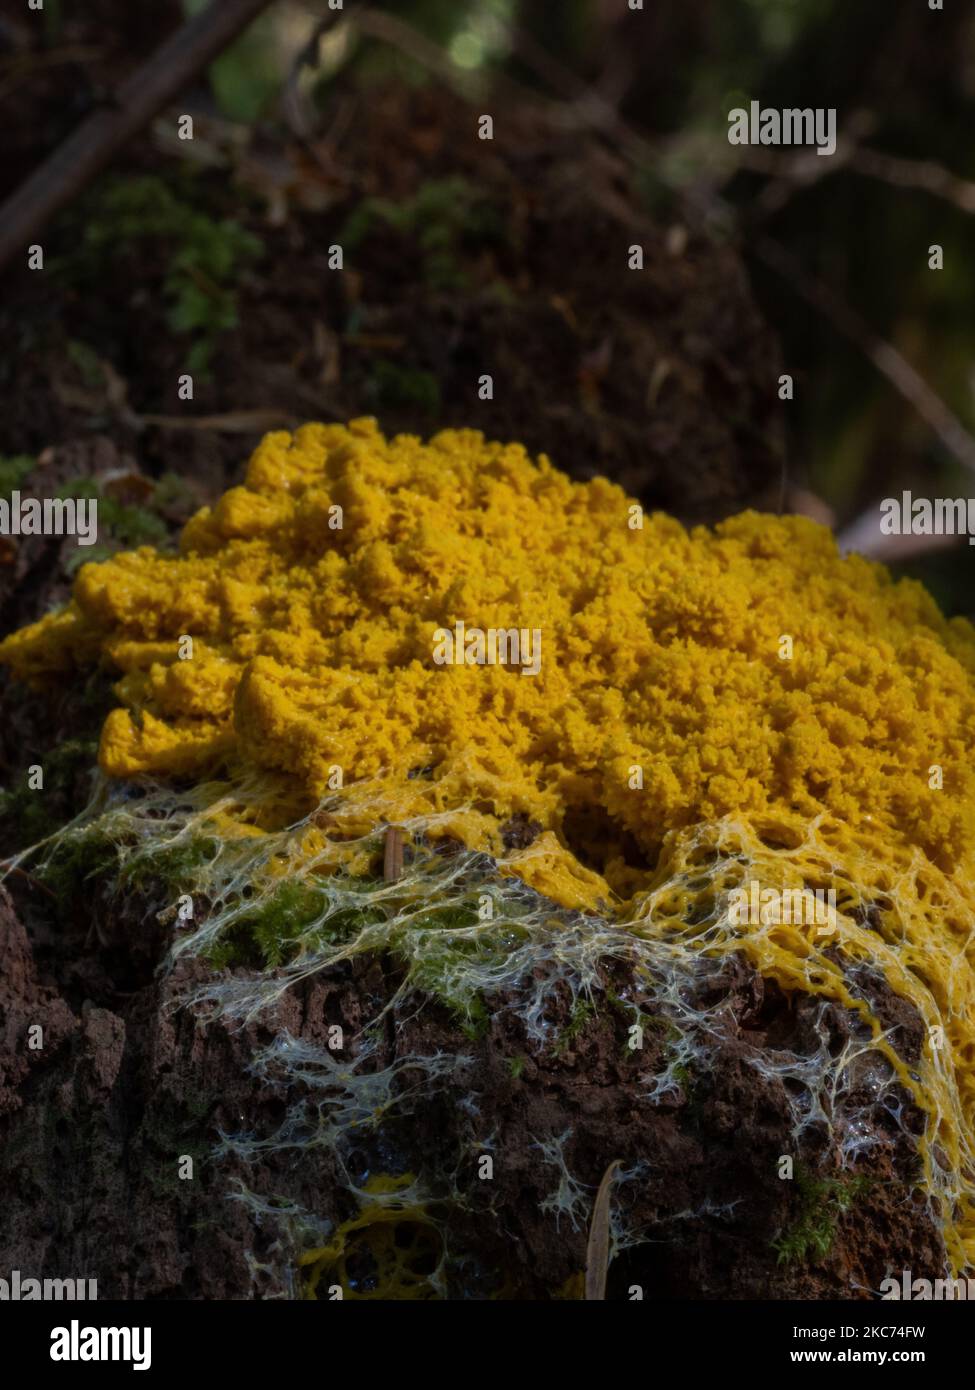 A closeup shot of scrambled egg slime mold on a tree trunk in the daylightv Stock Photo